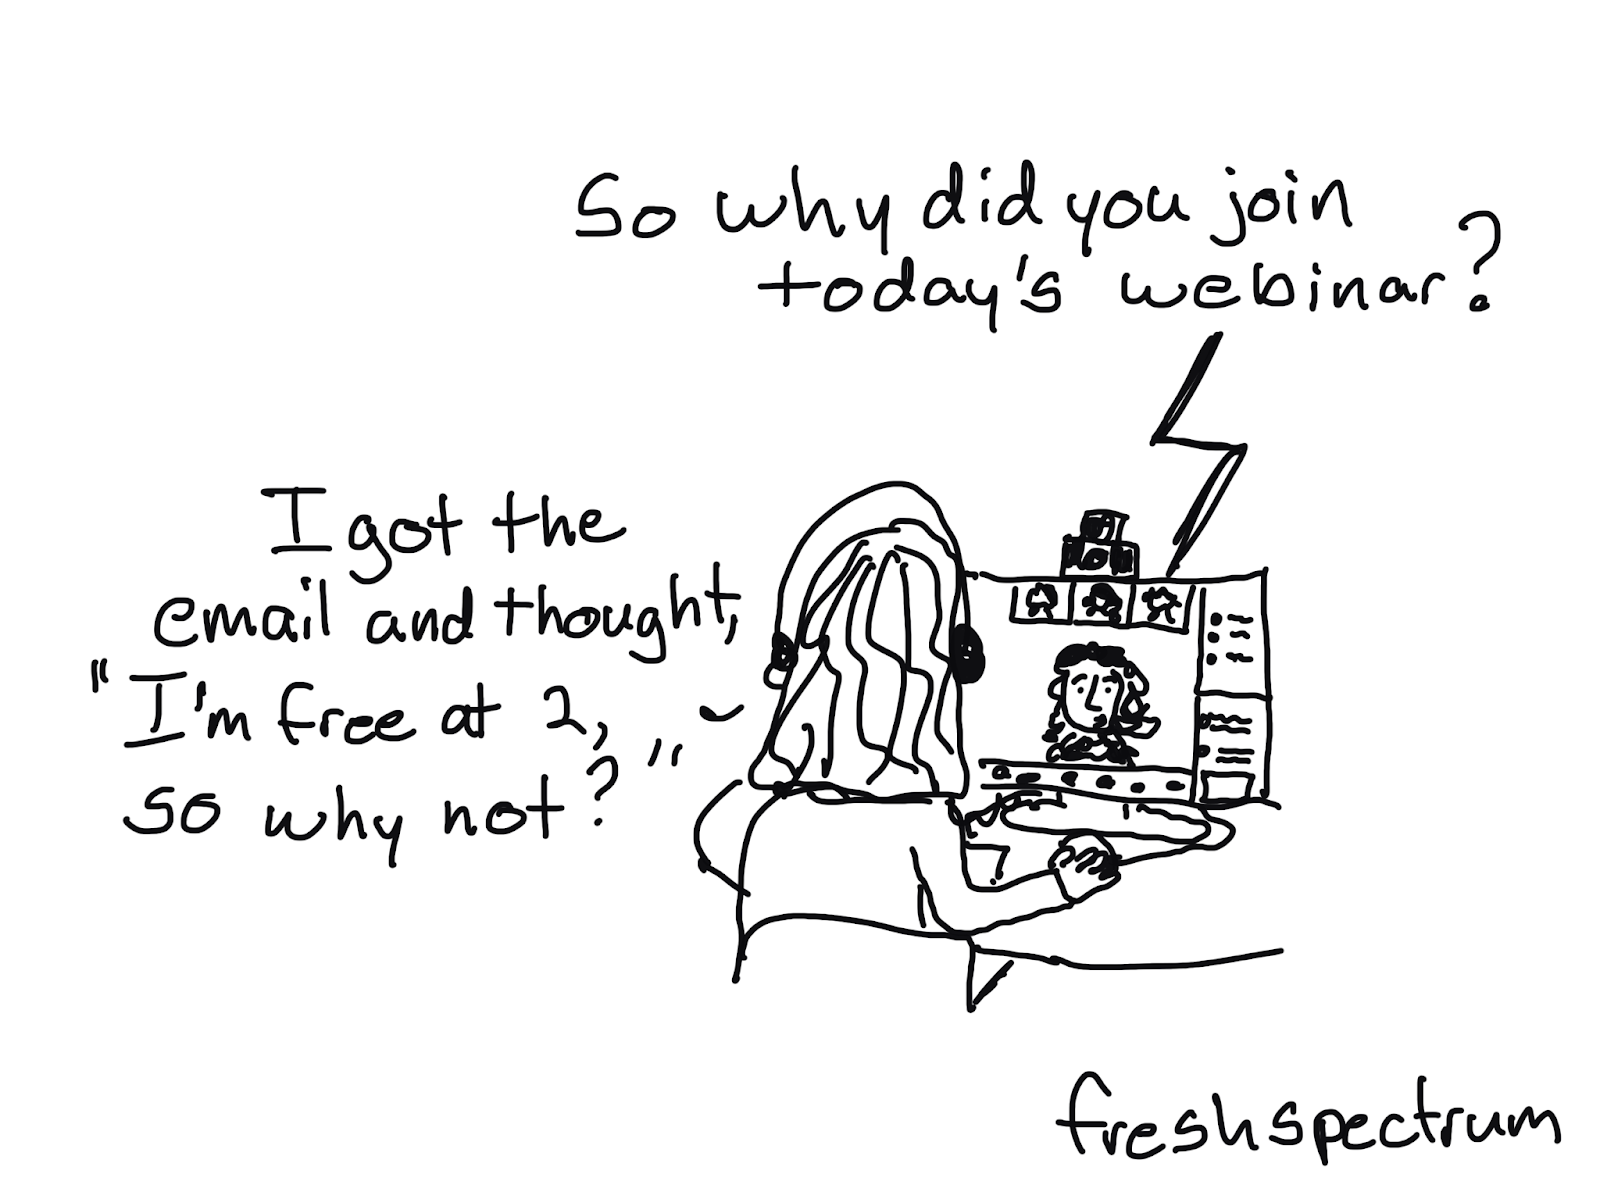 Cartoon illustration where a person is at a computer with headphones on and is saying "I got the email and thought 'I'm free at 2, so why not?'" and the person on the computer screen is saying "So why did you join today's webinar?"